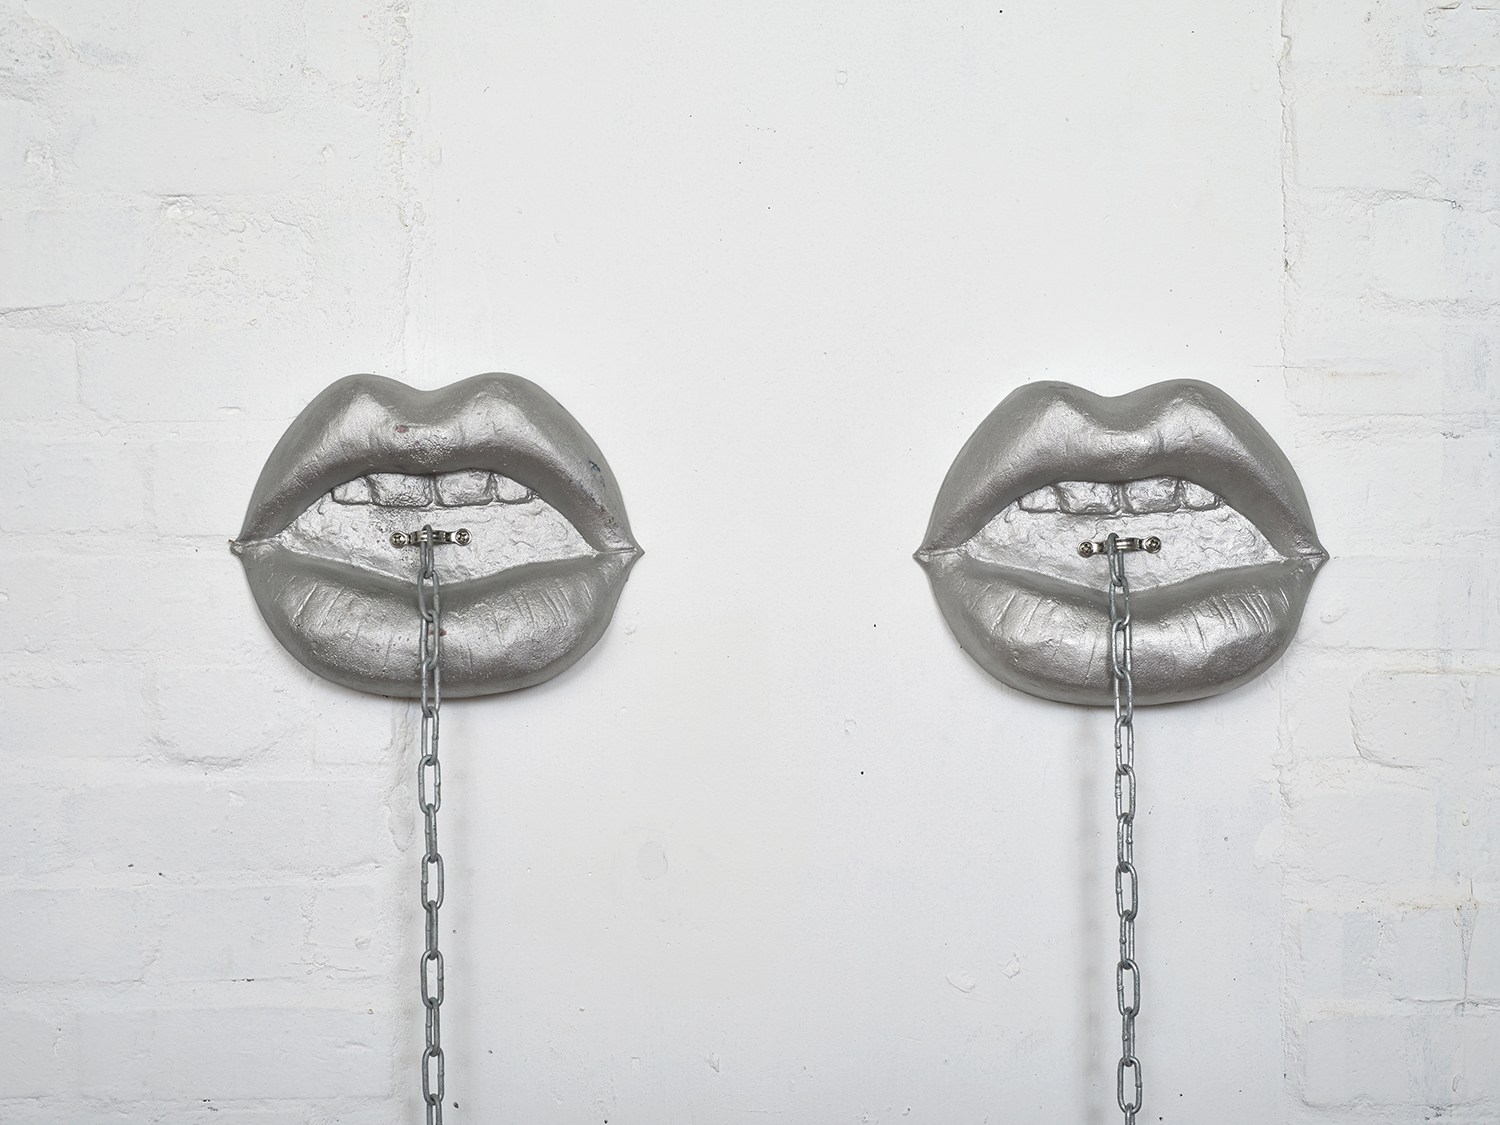  Liz Craft,  Between You &amp; Me (I - V) , 2018, Aluminum, steel chain, Pair of mouths: 28 x 21.5 x 5.7 cm / 11 x 8.5 x 2.25 in each, Chain dimensions variable 